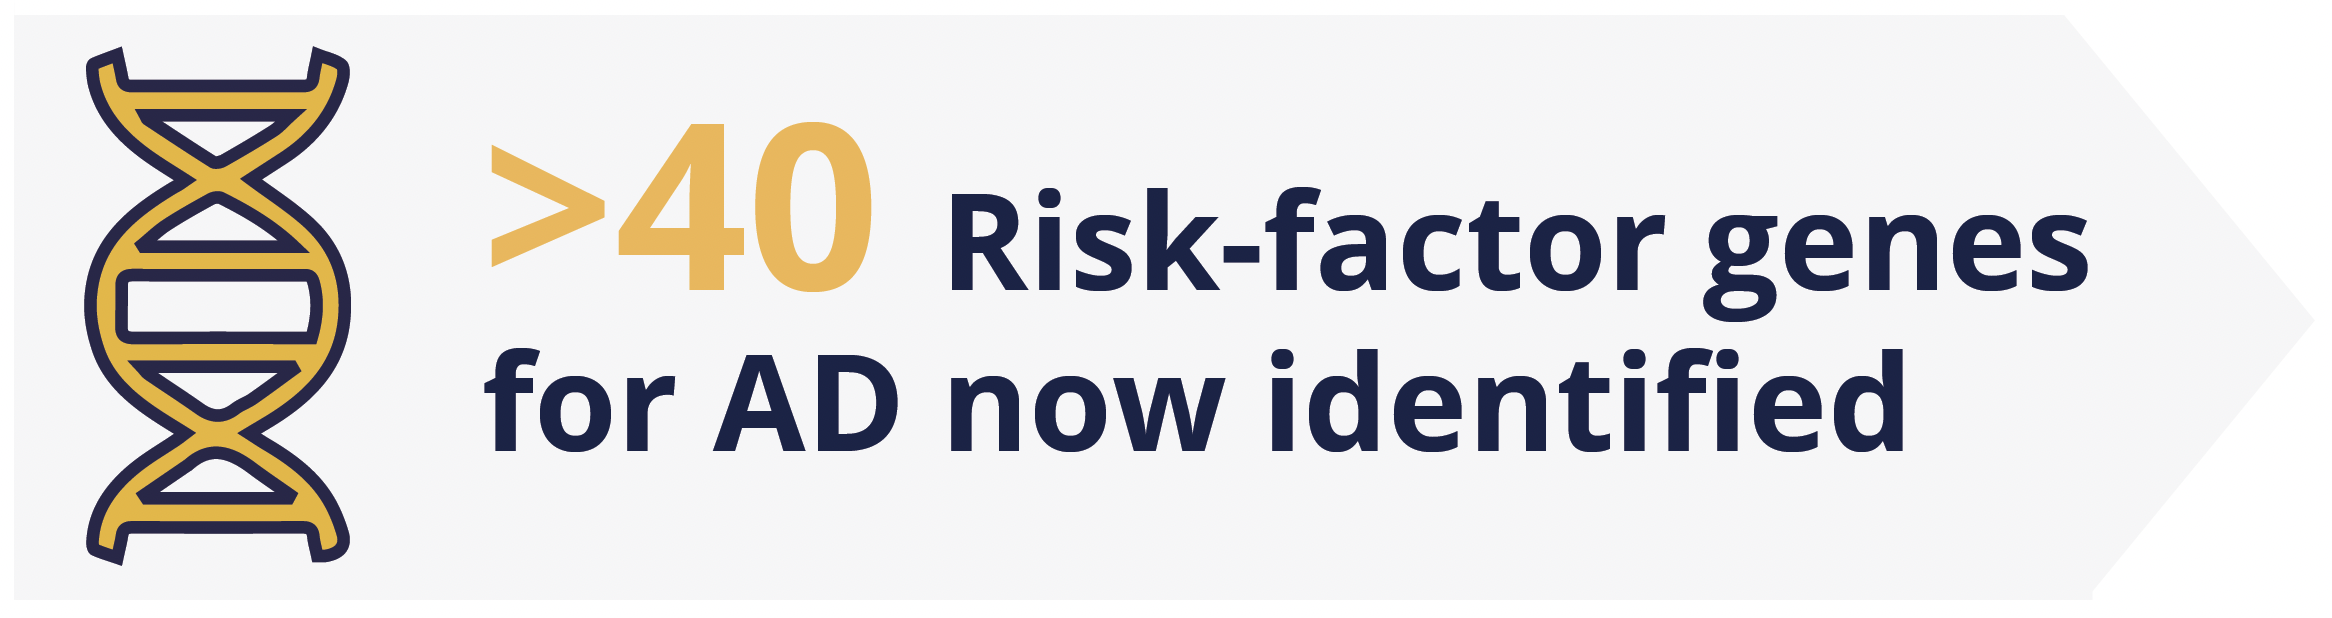 40 risk-factor genes for AD have now been identified